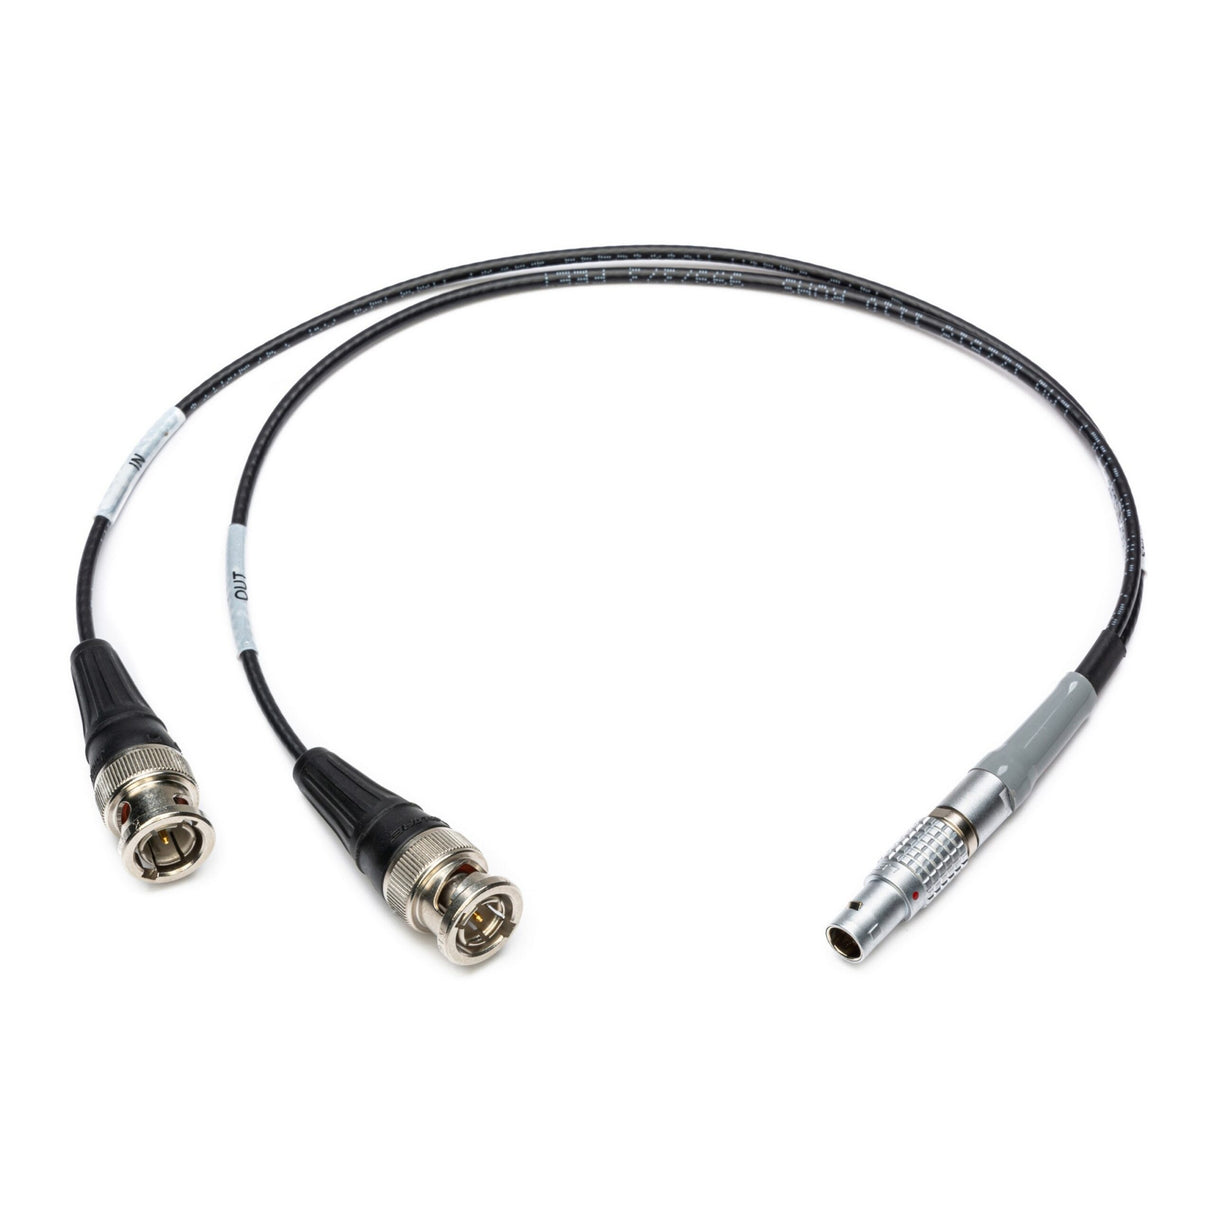 Laird Digital Cinema SD-TCD2-01 Sound Devices Time Code Jamming Cable Lemo 5-Pin Male to BNC In and BNC Out, 1 Foot